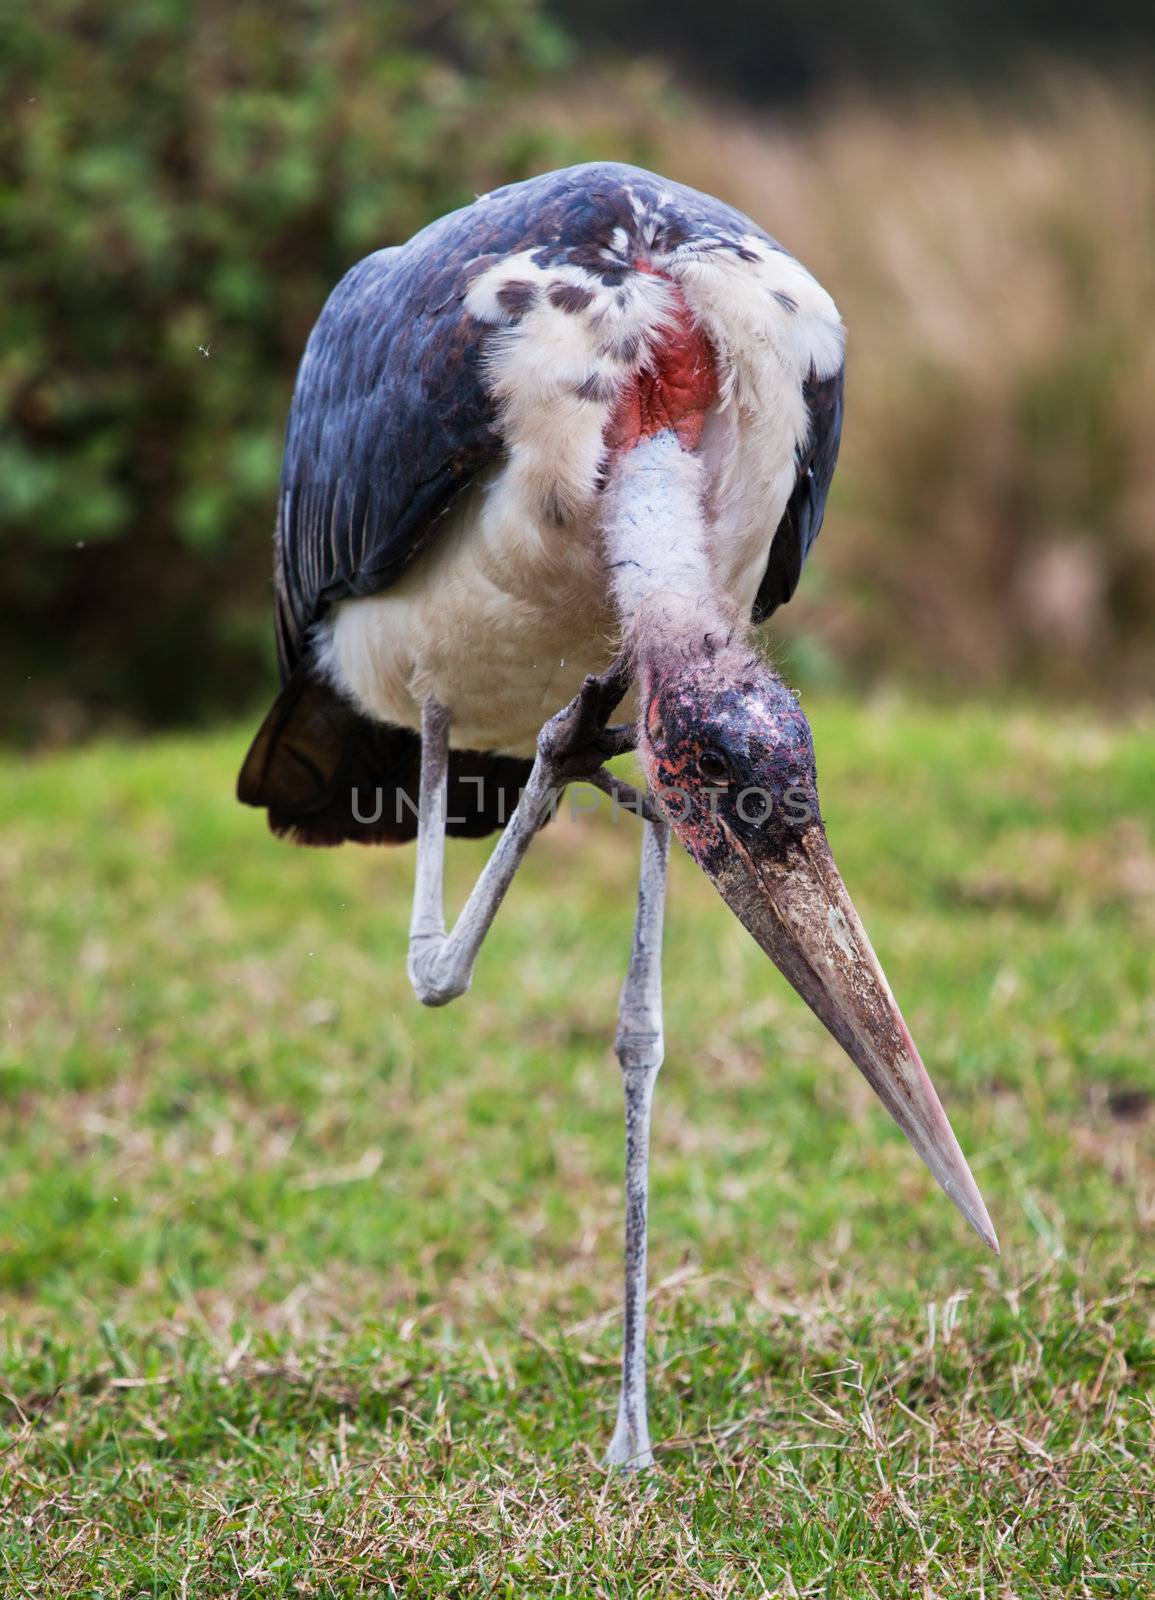 The Marabou Stork in Tanzania, Africa by photocreo